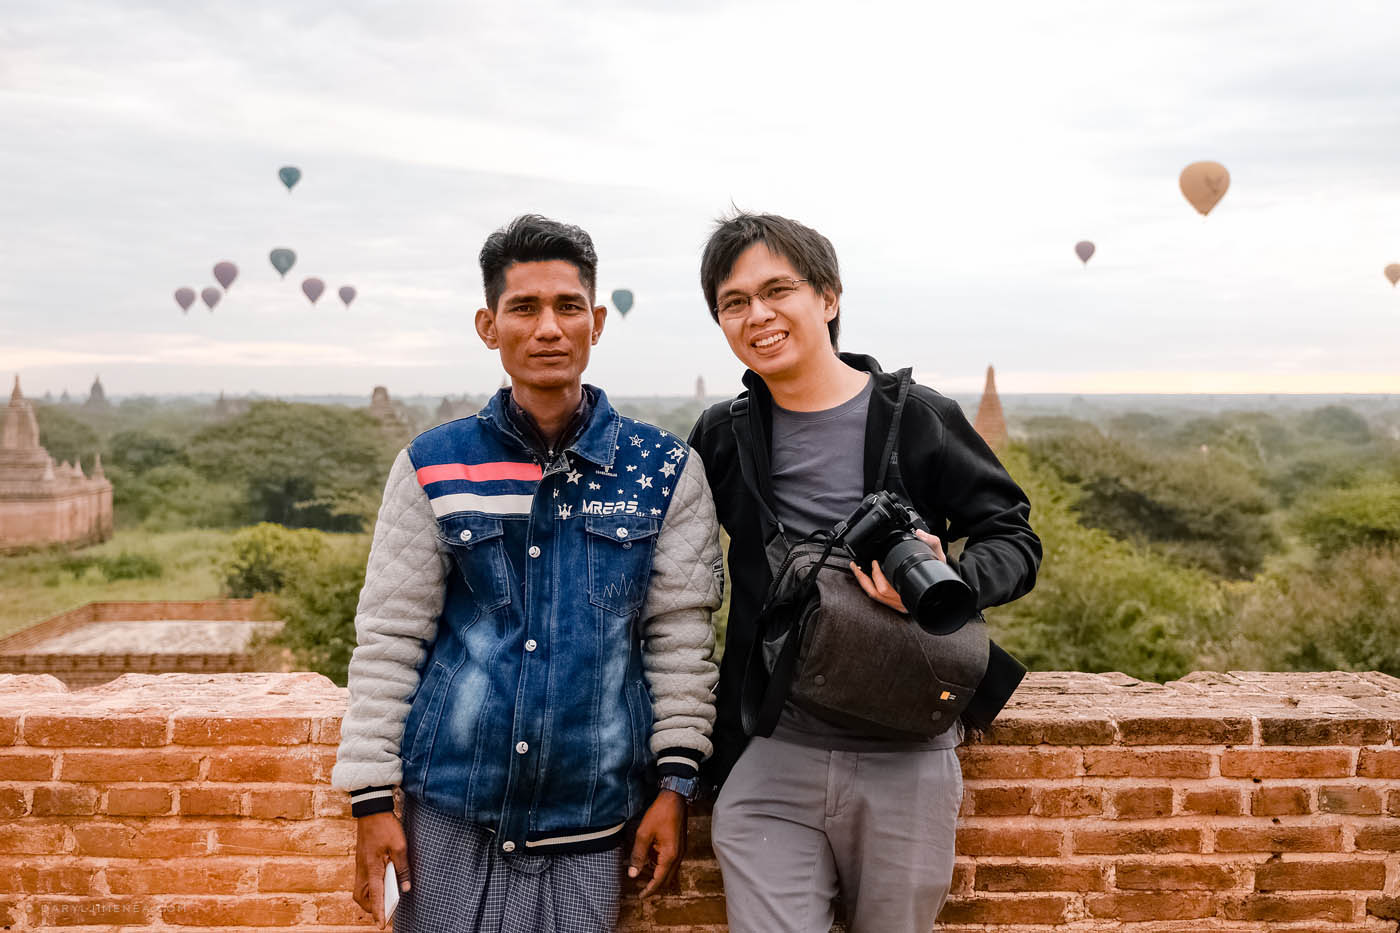 Our guide who takes pretty good photos too. You can contact him thru minthu.bagan@gmail.com